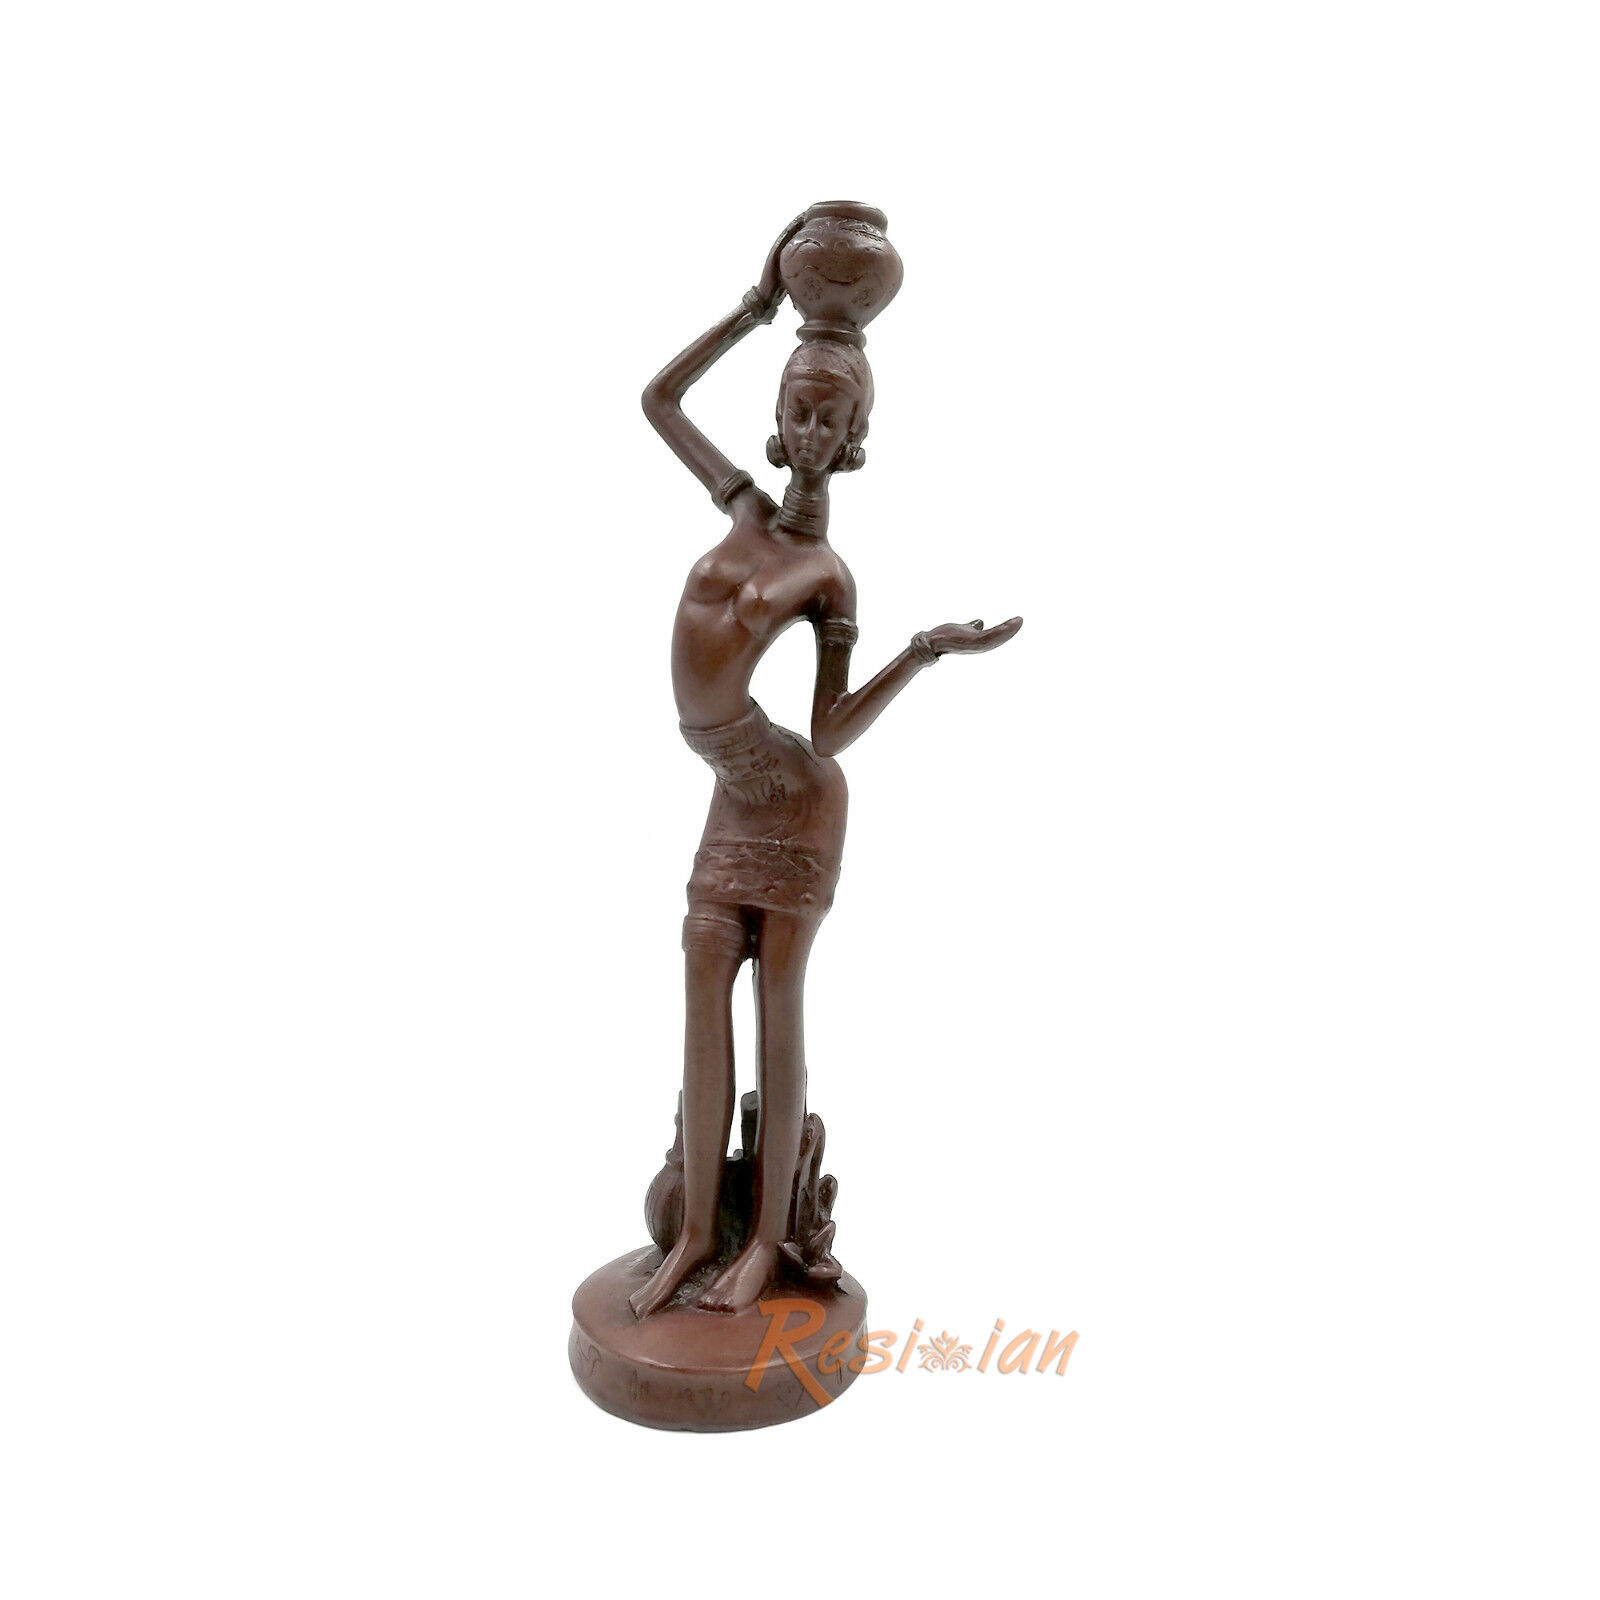 New African Ethnic Tribal Tall Skinny Woman Resin Figurine Statue Vintage Style